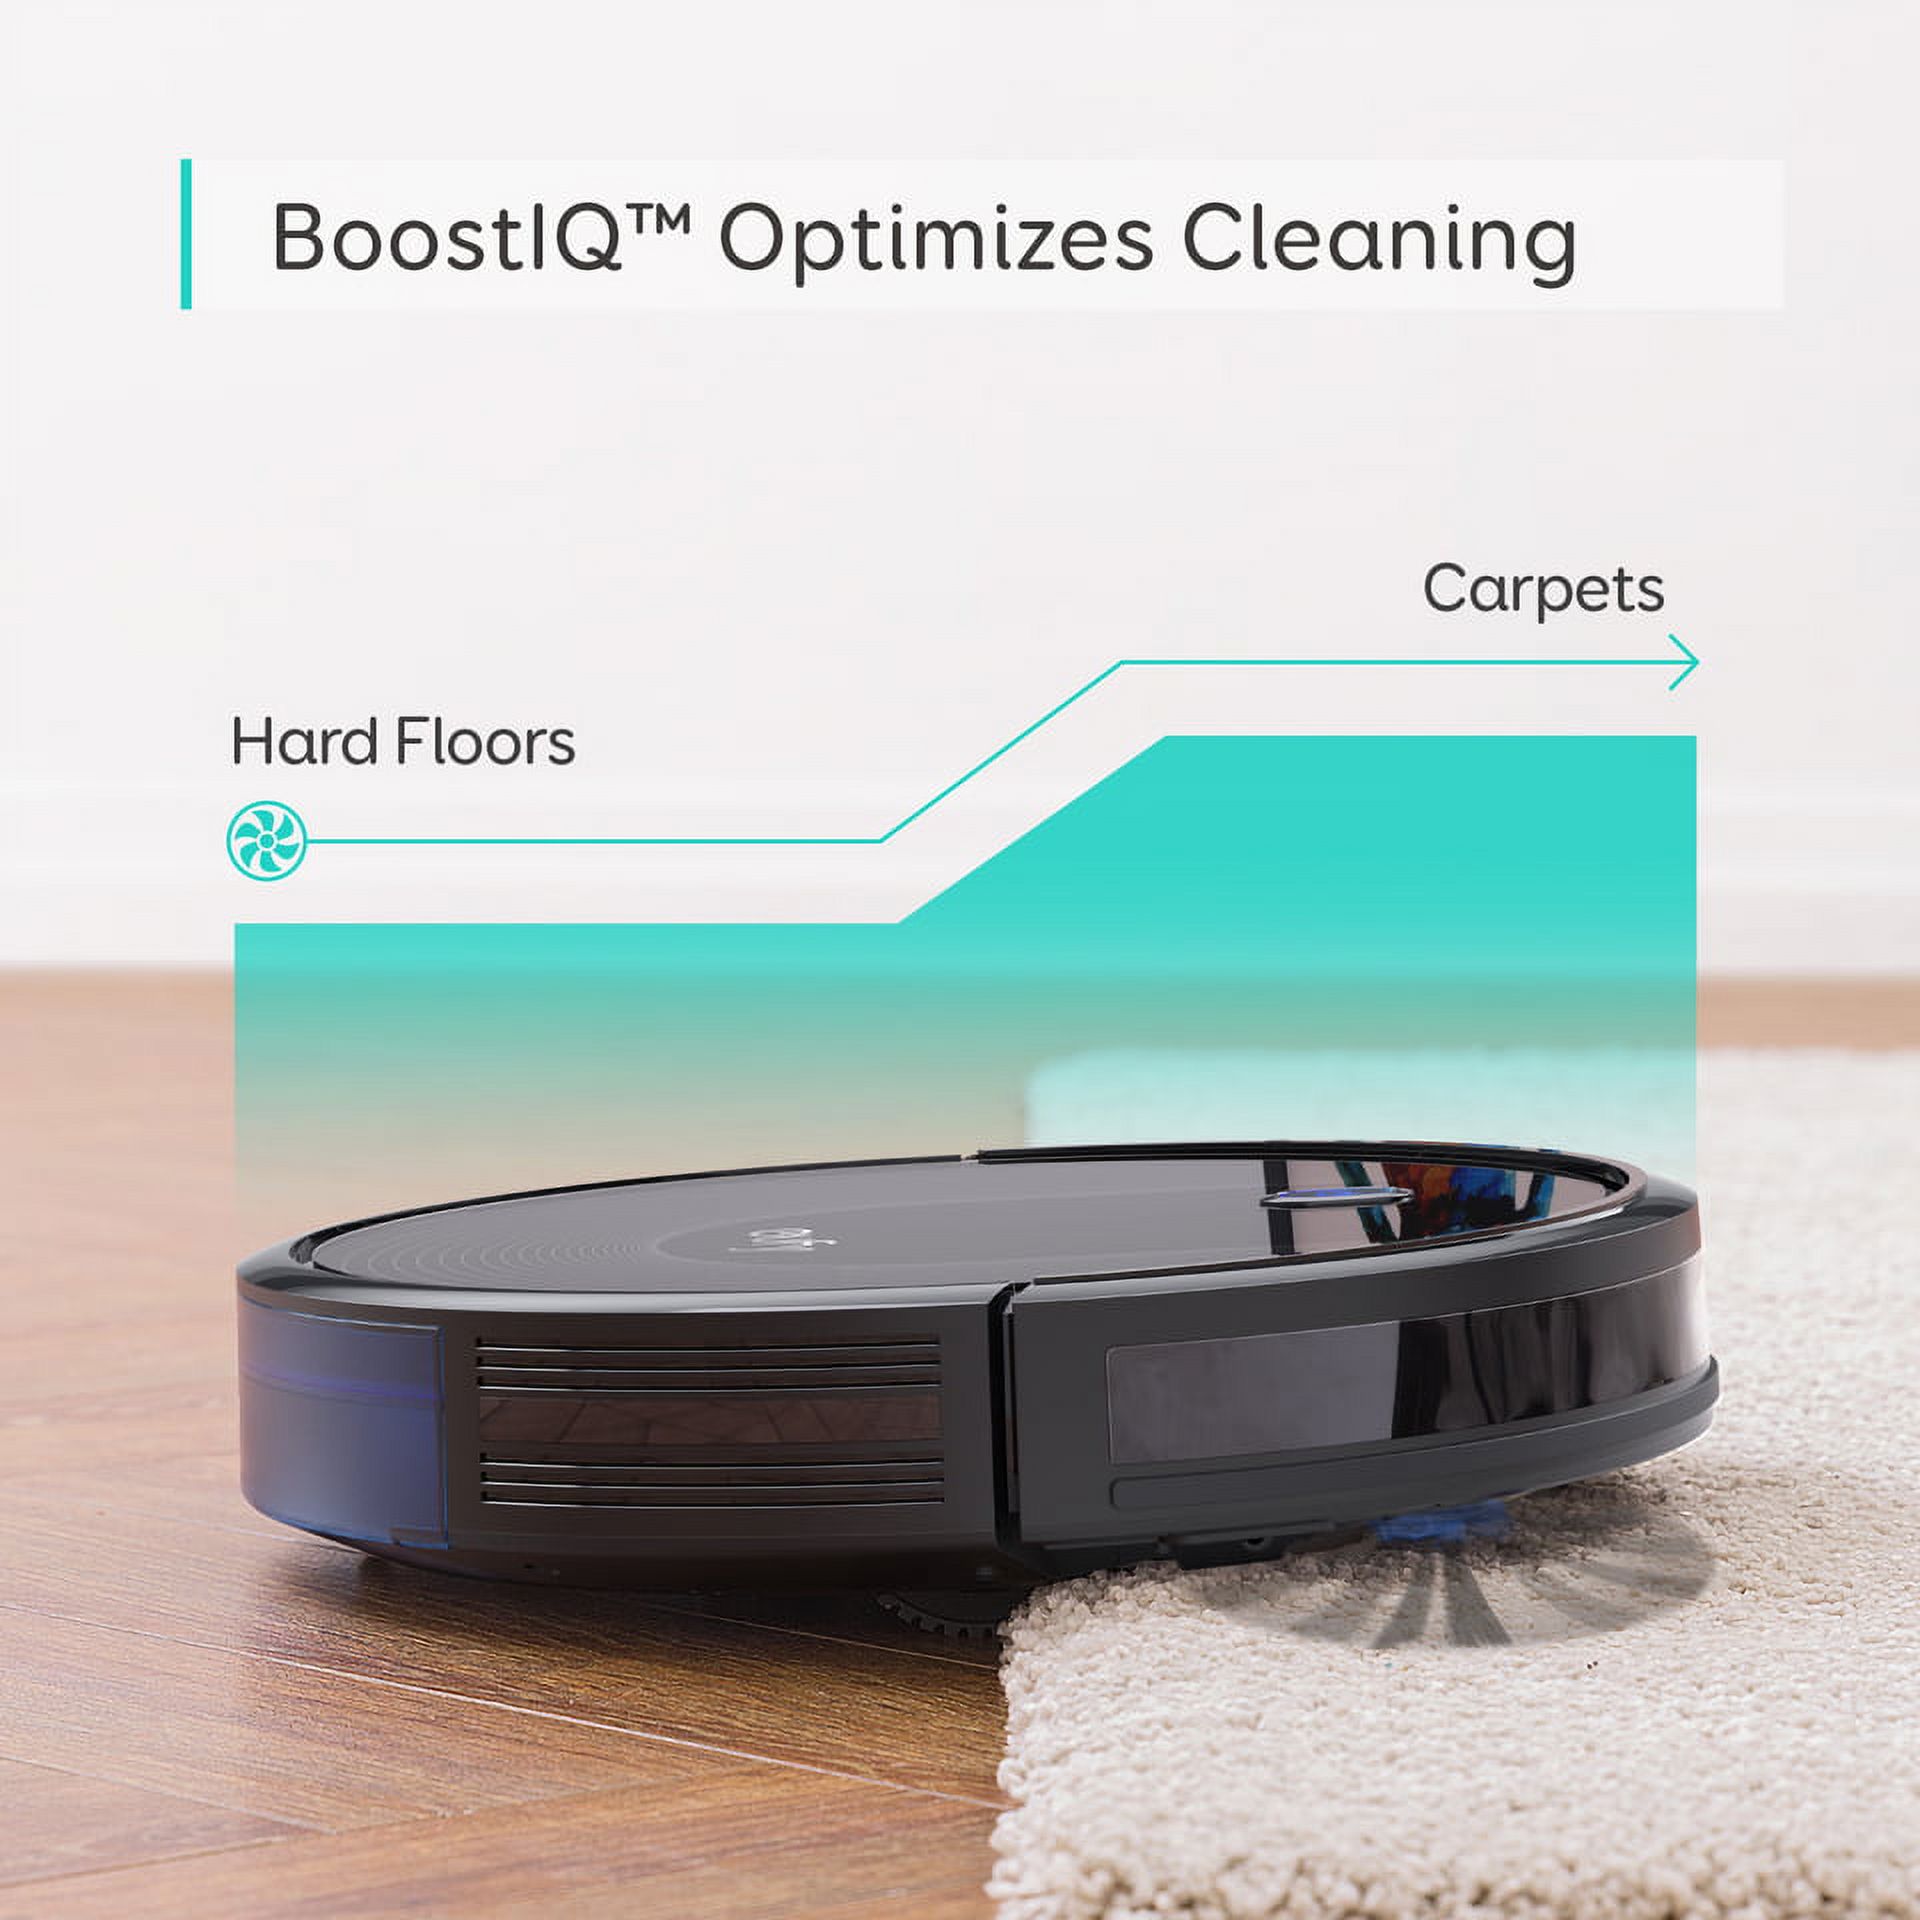 eufy BoostIQ RoboVac 30, Robot Vacuum Cleaner, Upgraded, Super-Thin, 1500Pa Strong Suction, 13ft Boundary Strips Included, Quiet, Self-Charging, Cleans Hard Floors to Medium-Pile Carpets - image 2 of 7